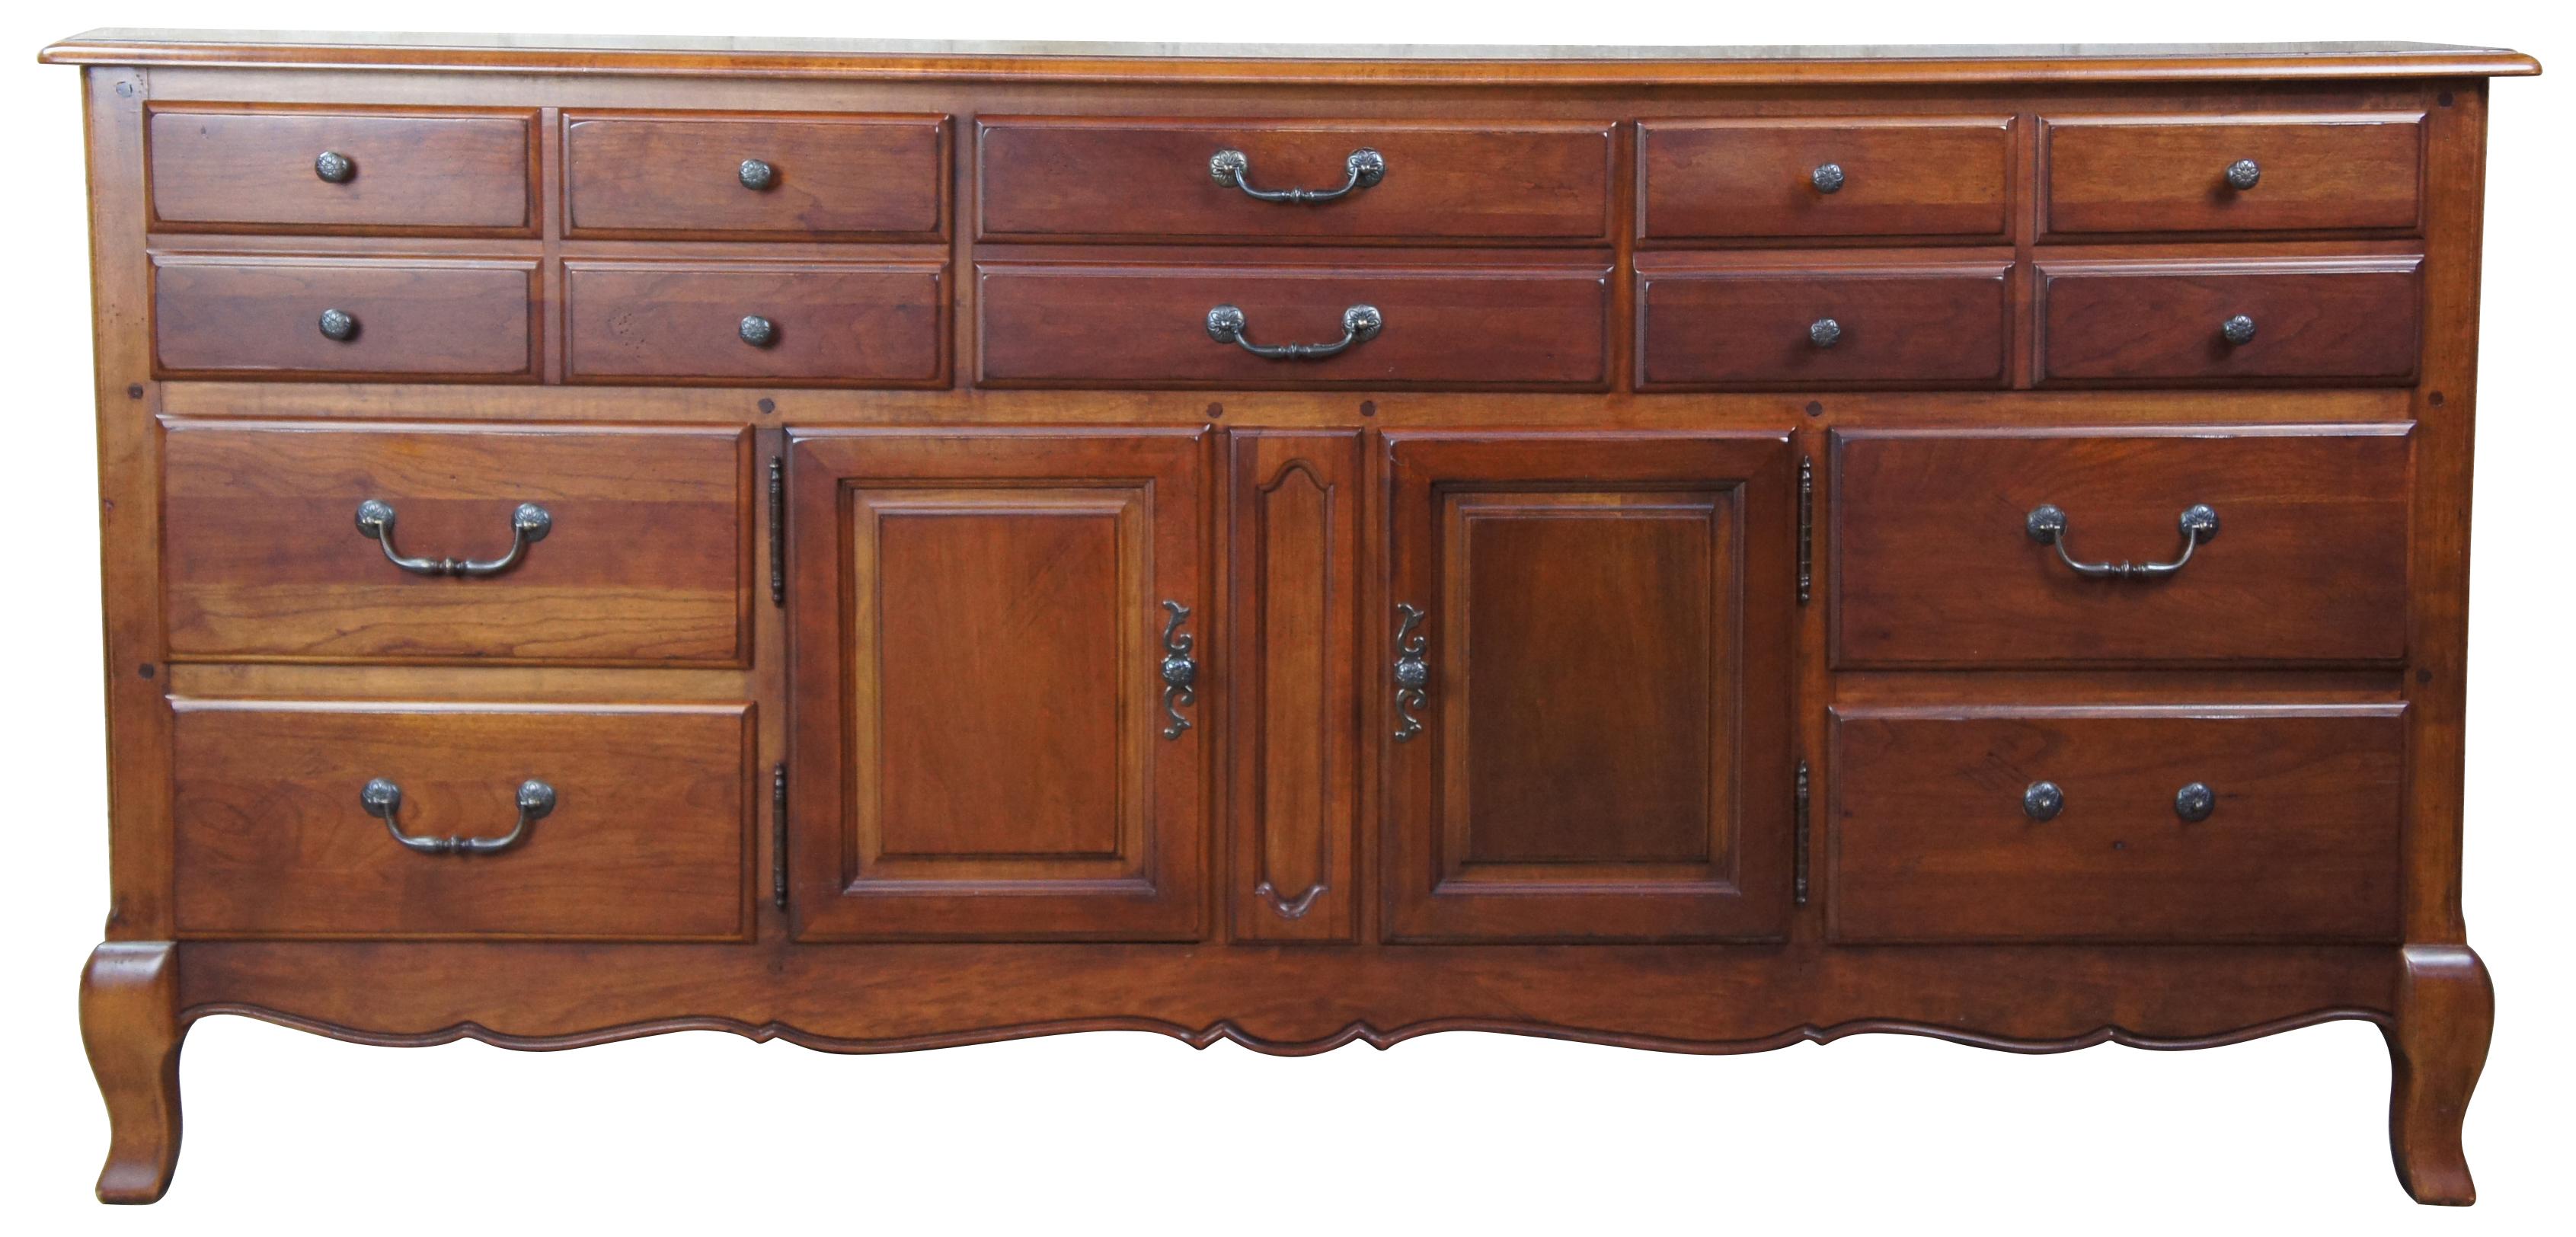 A traditional buffet by Hickory White. Drawing inspriration from French Provincial and Tuscan styling. Made from cherry with seven drawers and lower cabinet for storage.
   